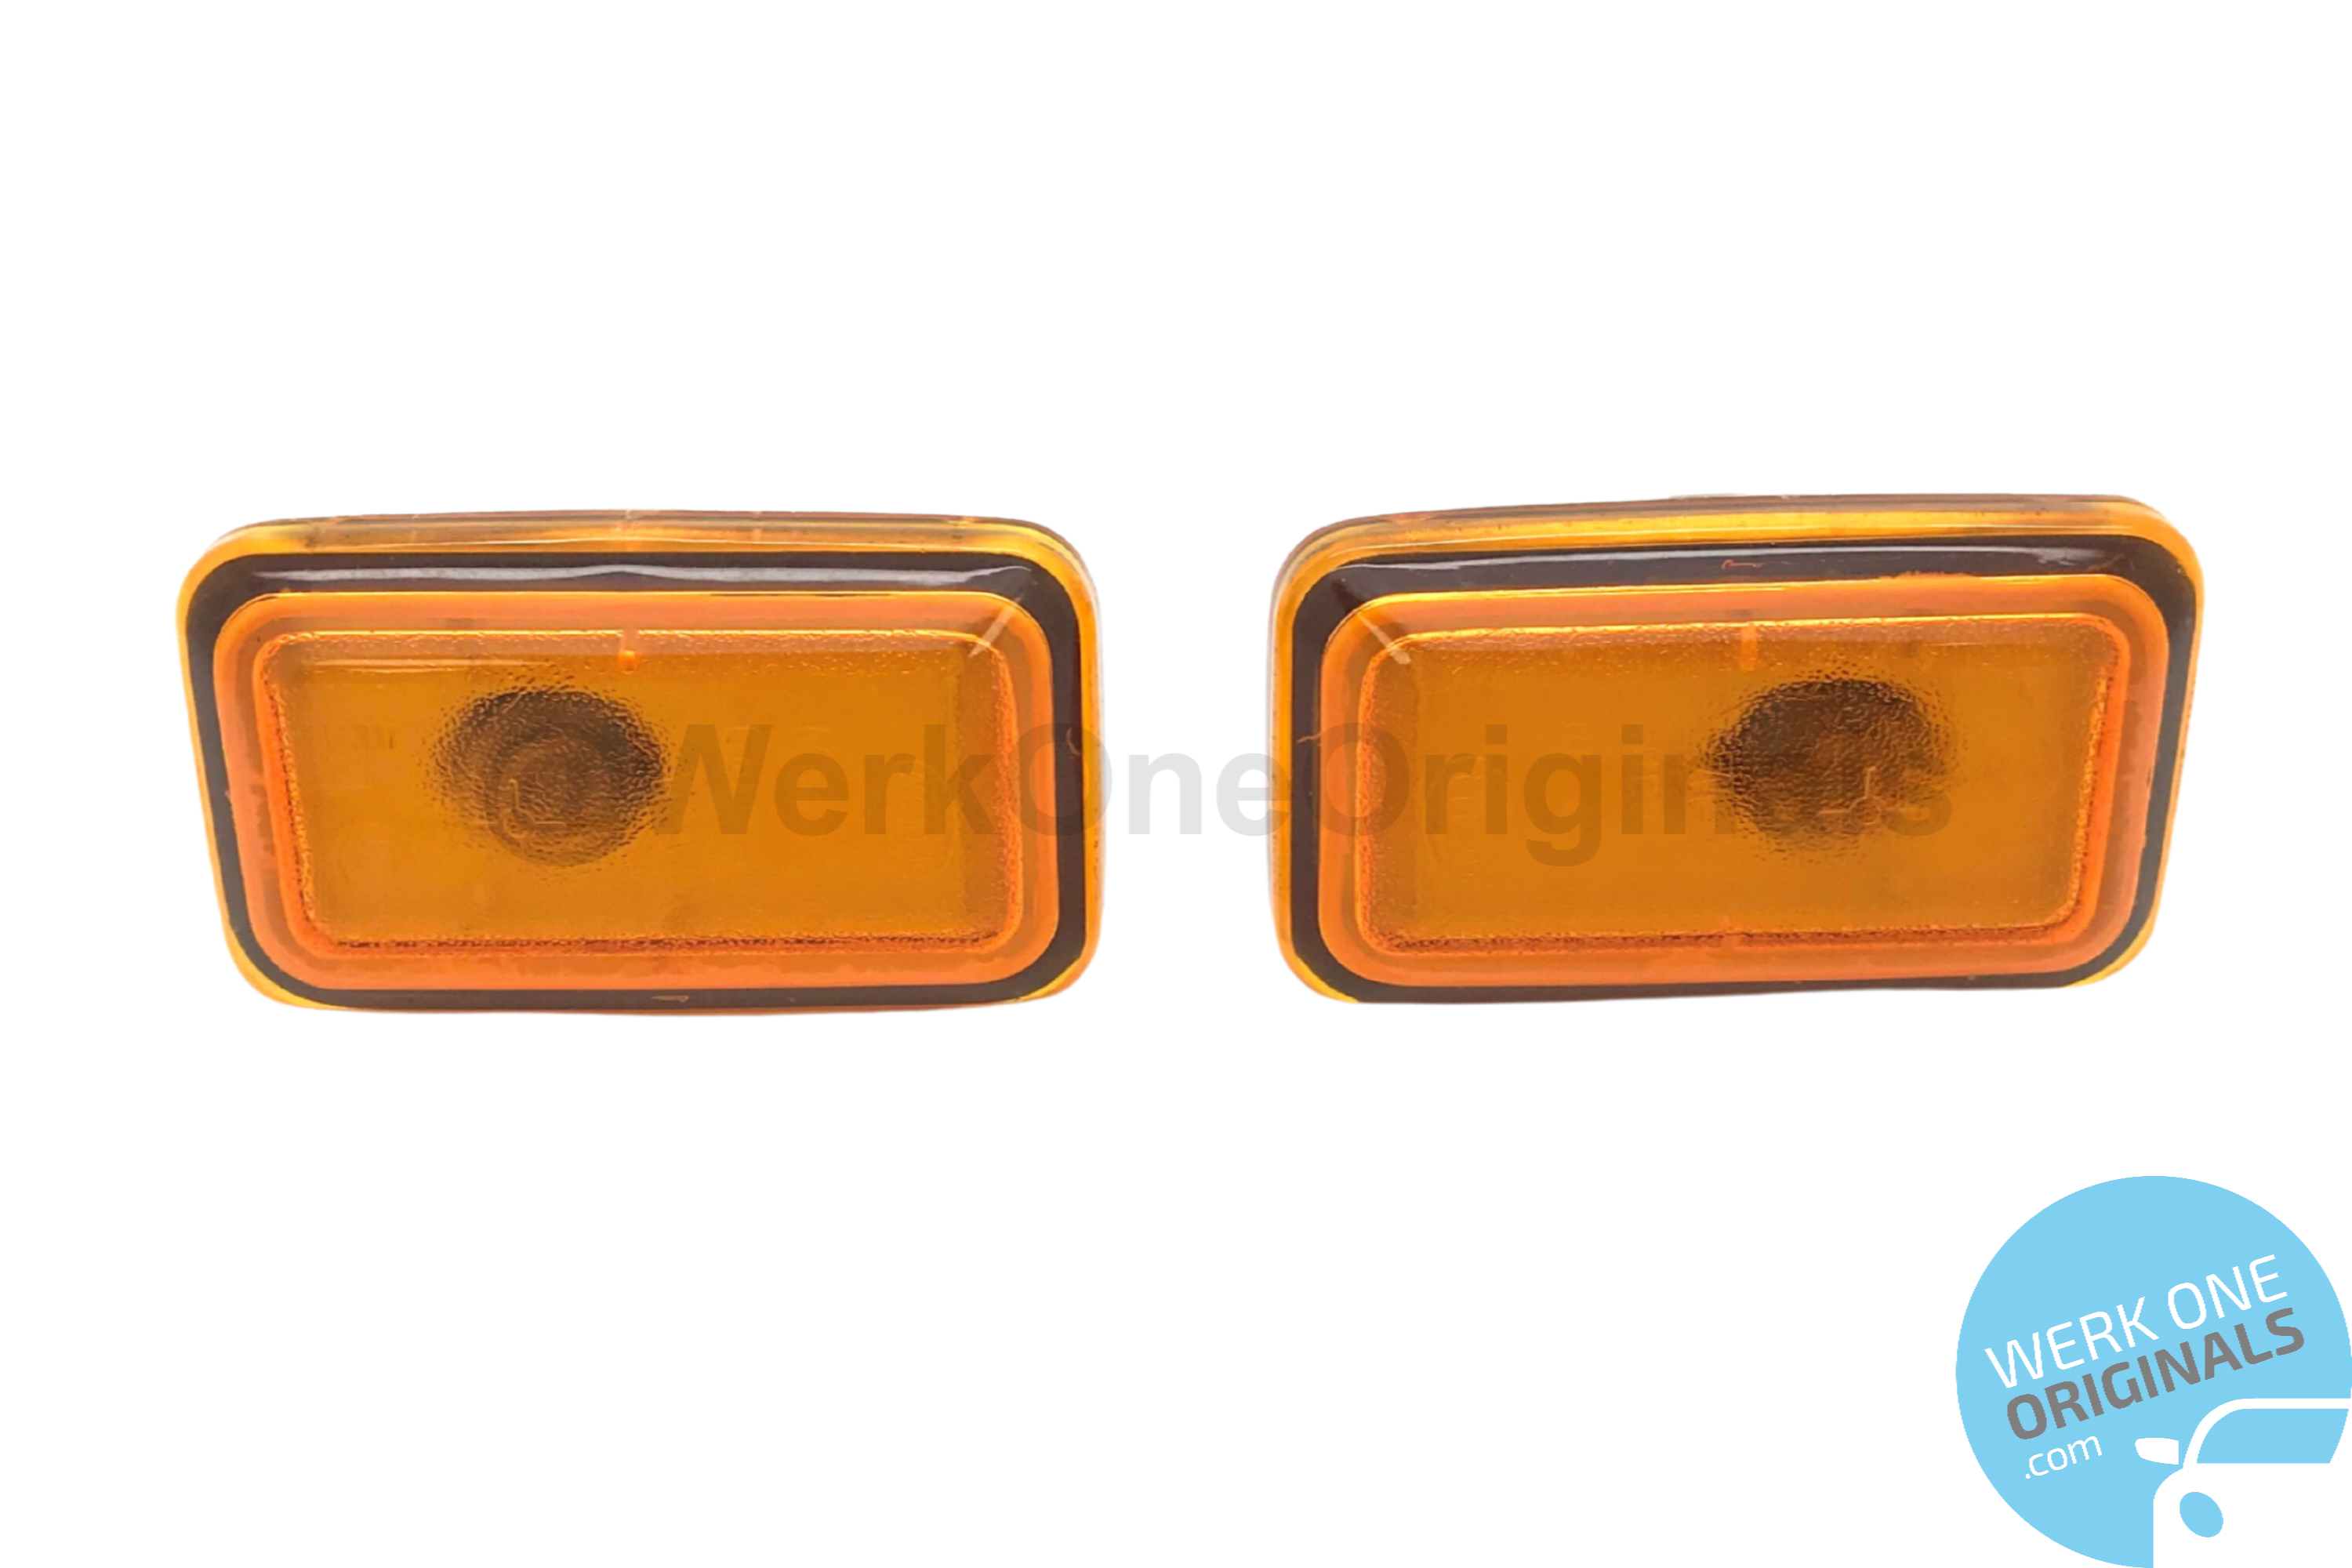 Porsche Genuine Side Repeater Indicator x2 for 911 Type 993 Models